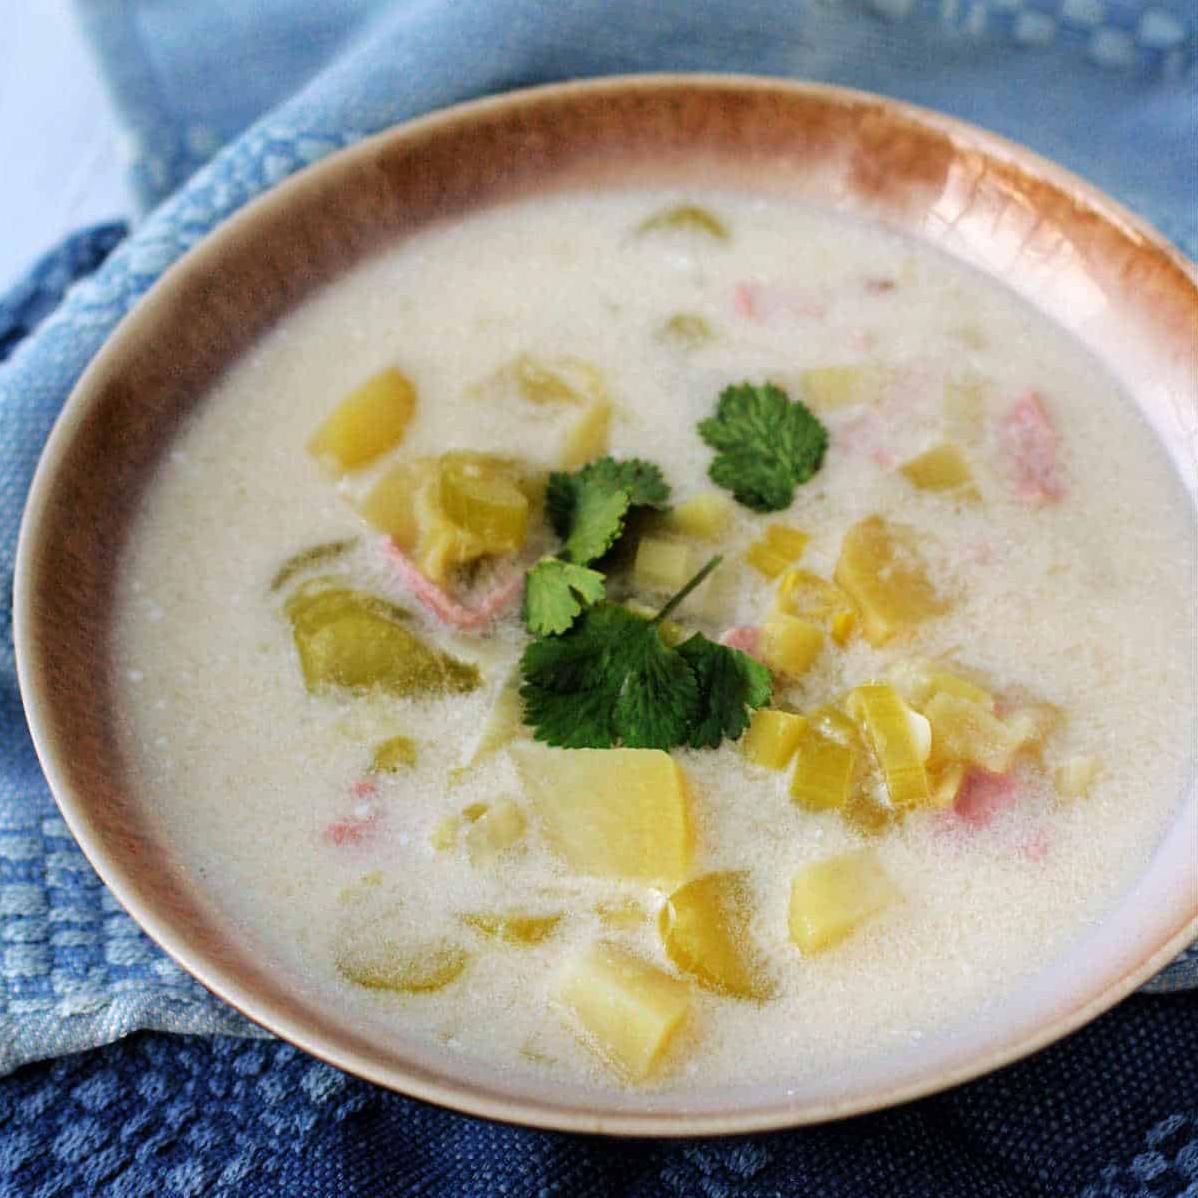  Indulge in a comforting bowl of warm potato soup, without the dairy or wheat.